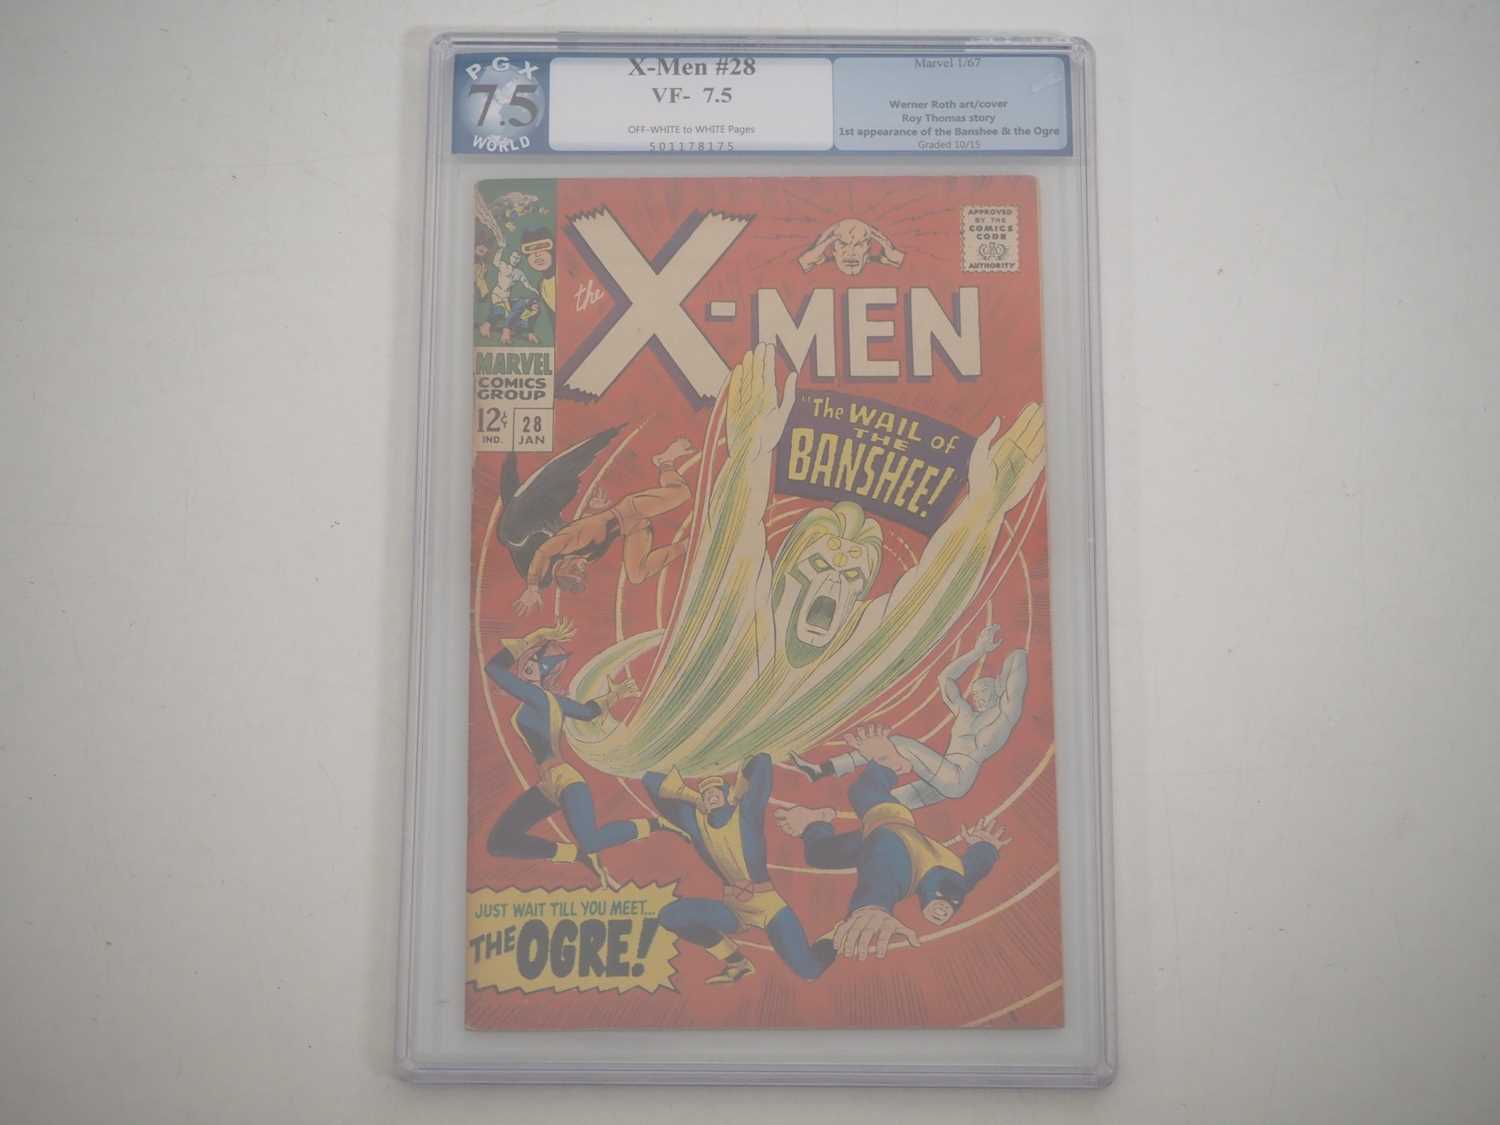 X-MEN #28 (1967 - MARVEL) GRADED 7.5 (VF-) by PGX - The first full appearance of Banshee, father